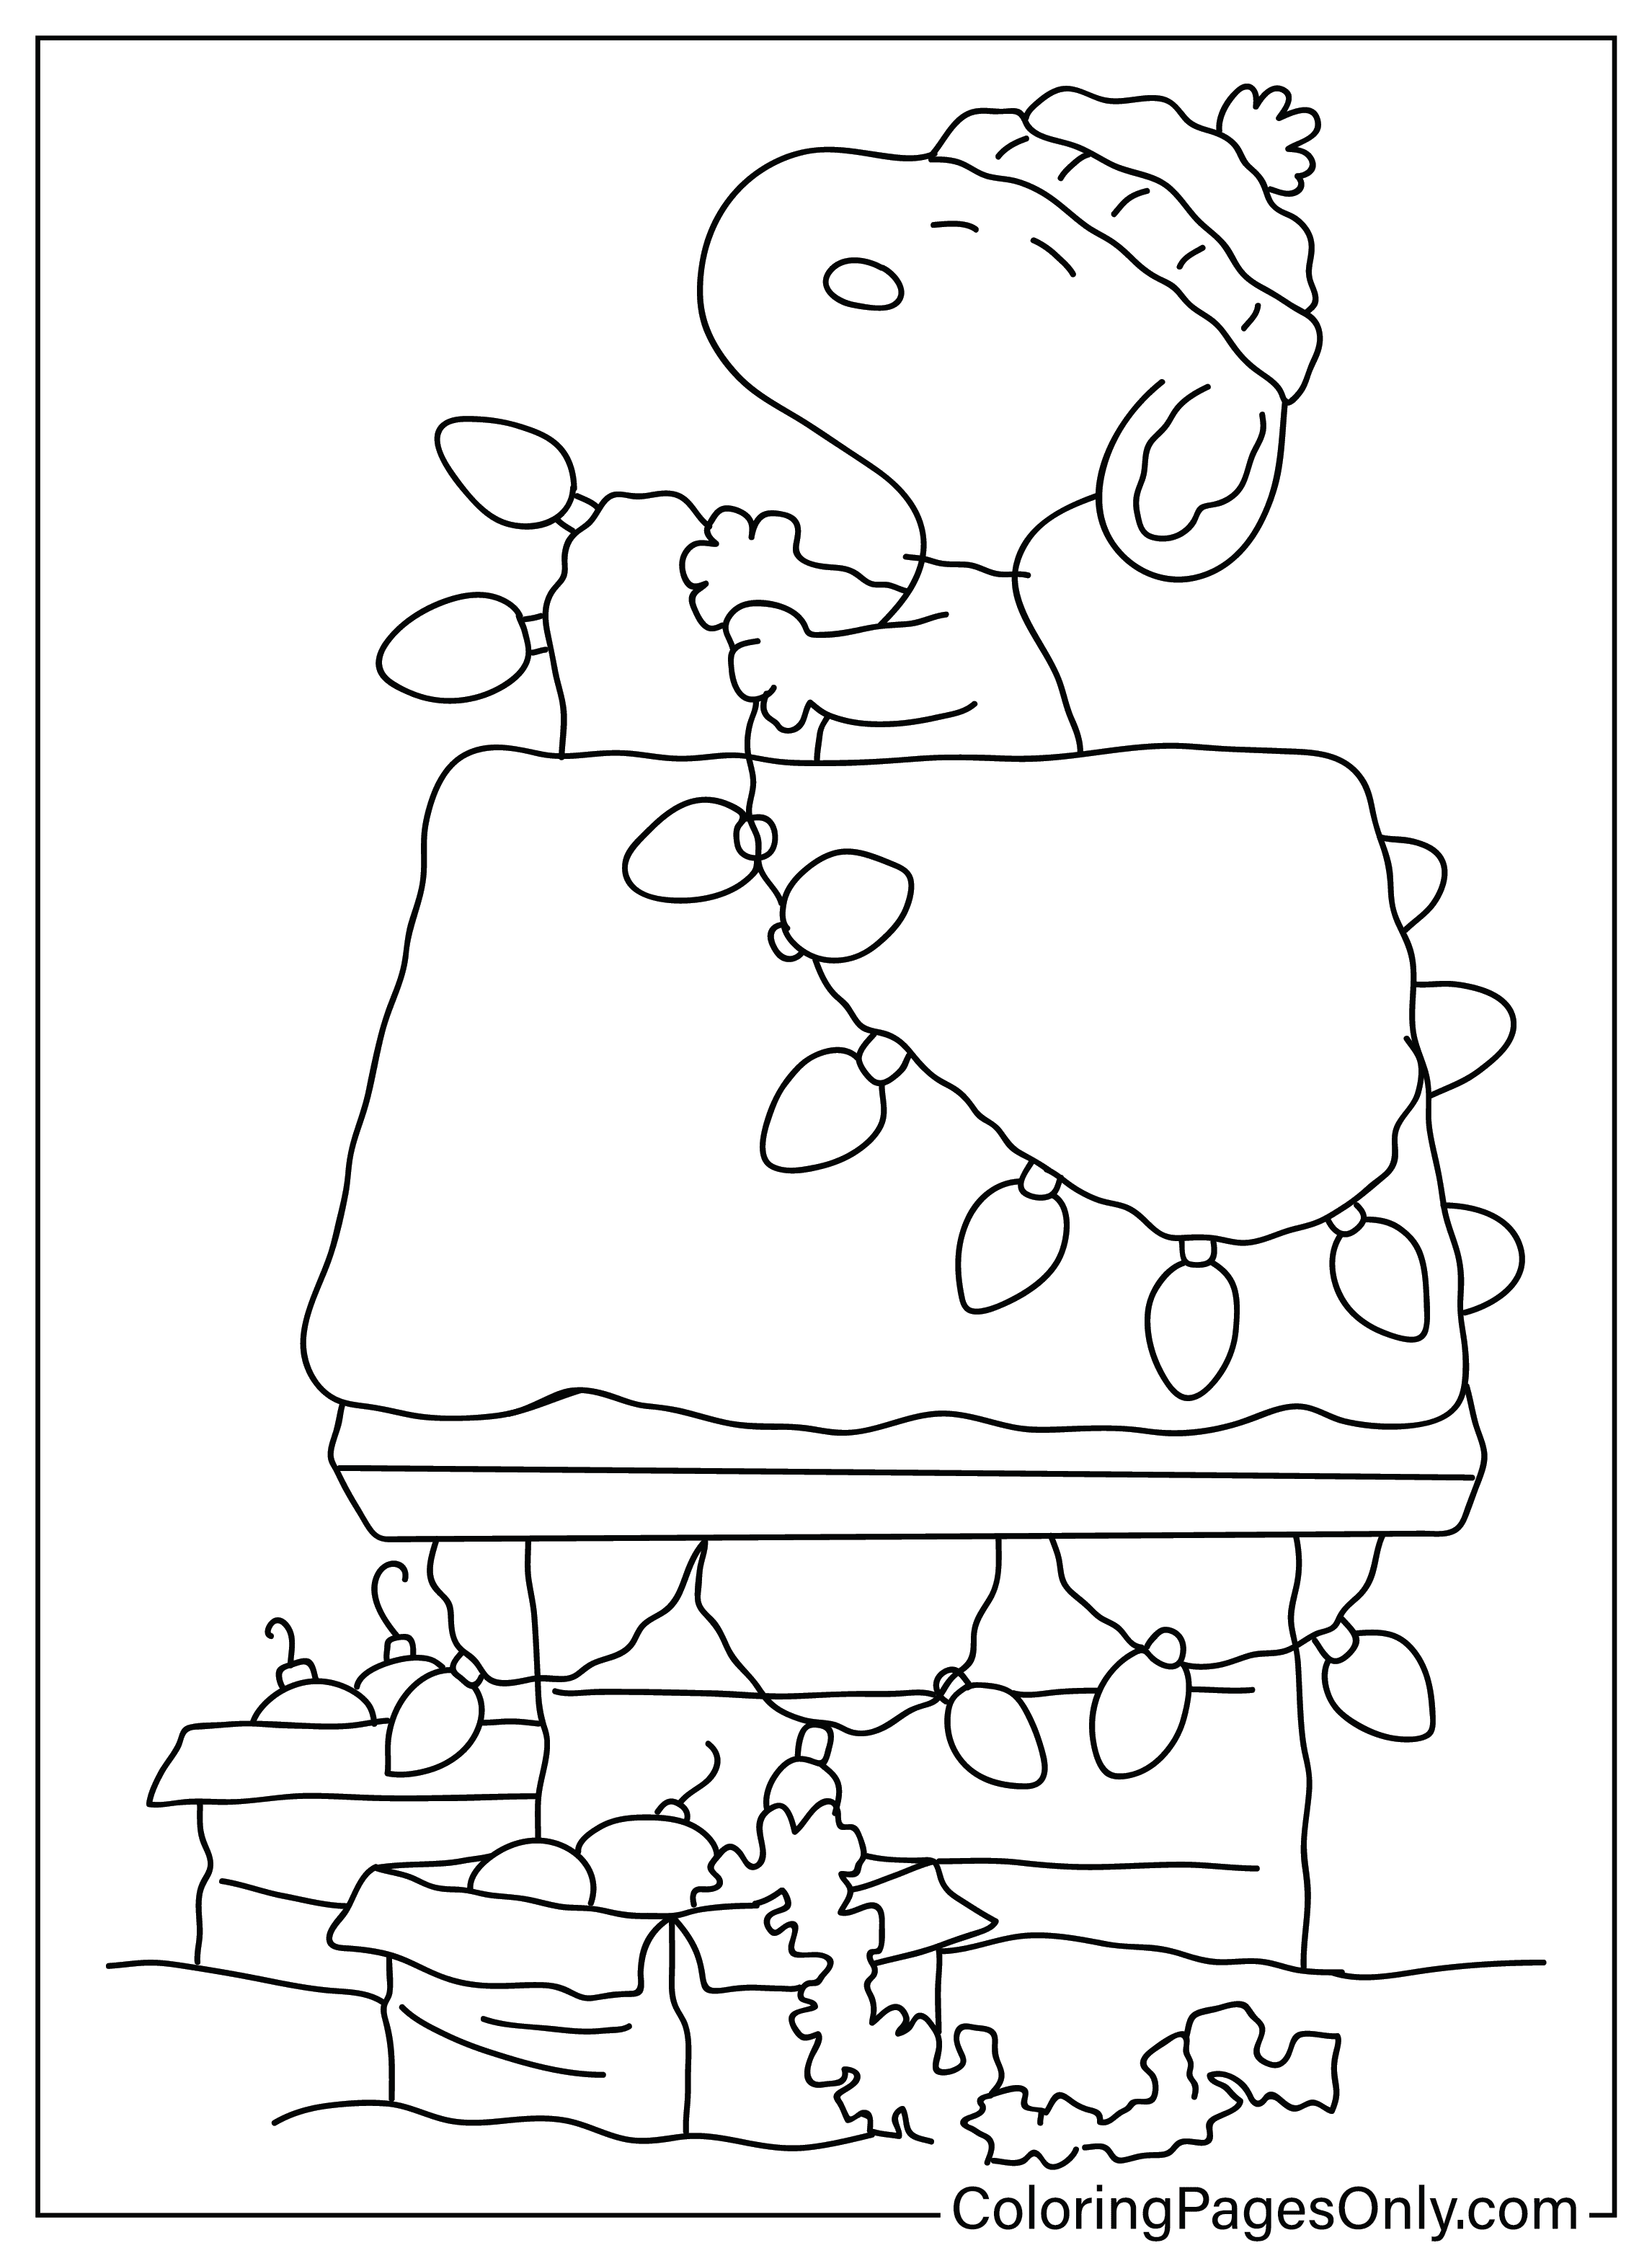 Christmas Snoopy Coloring Page from Christmas Cartoon